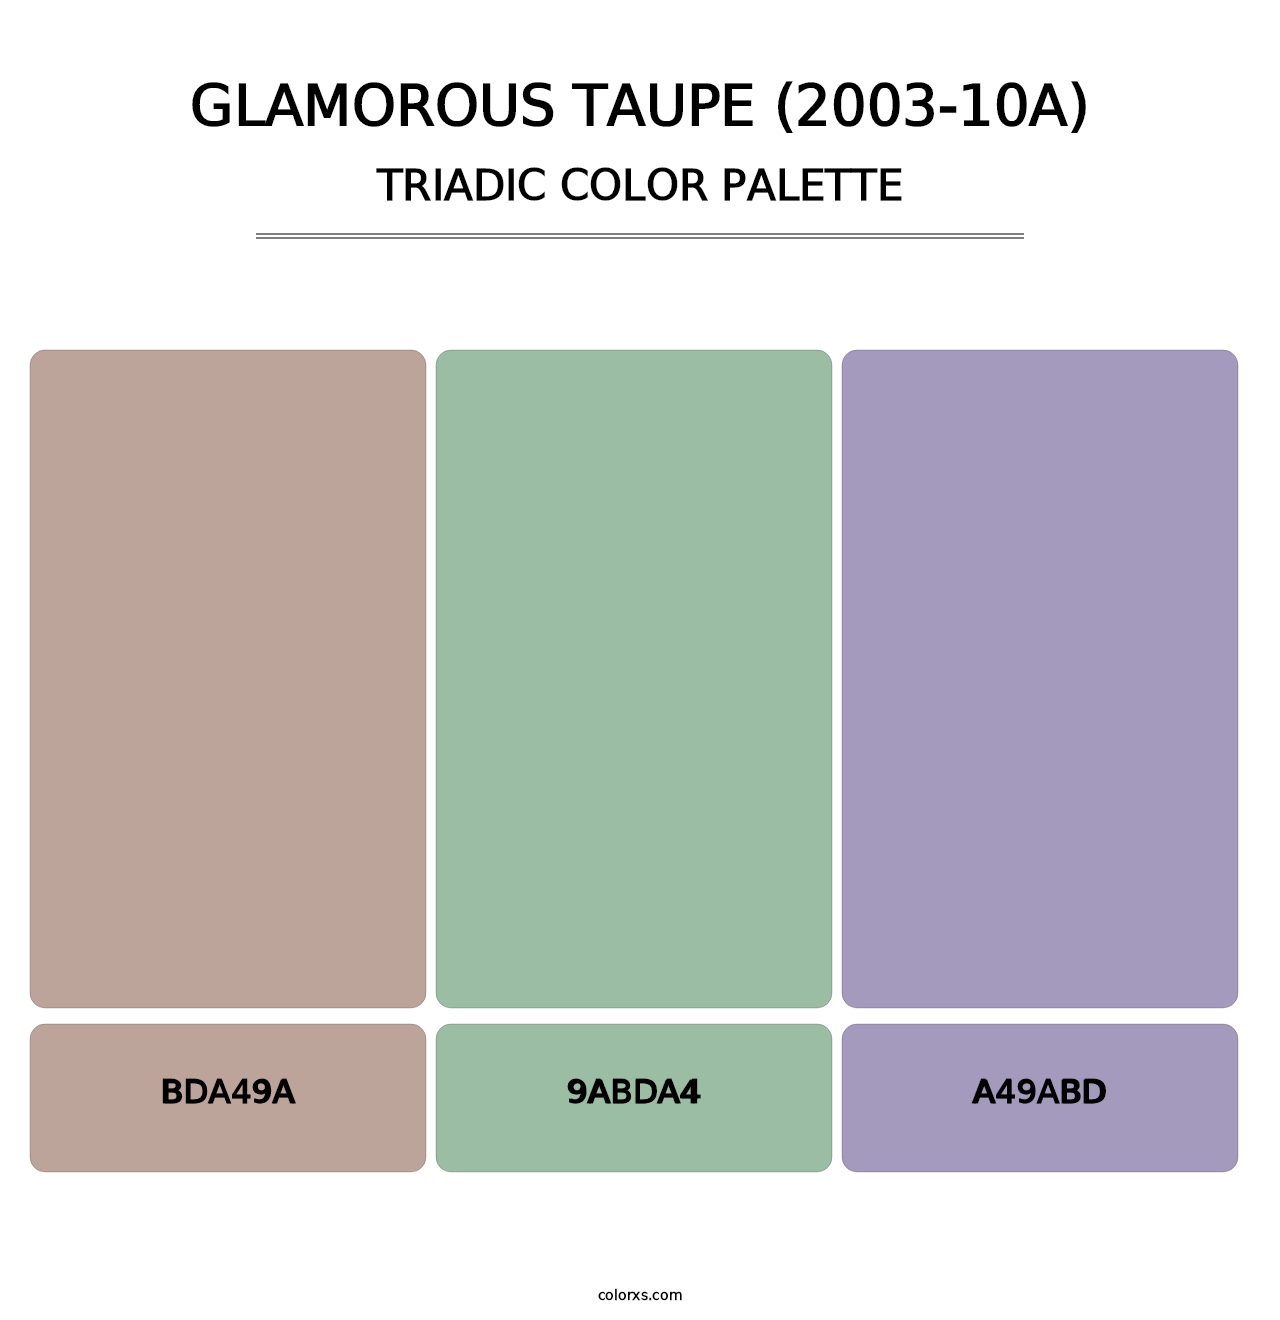 Glamorous Taupe (2003-10A) - Triadic Color Palette